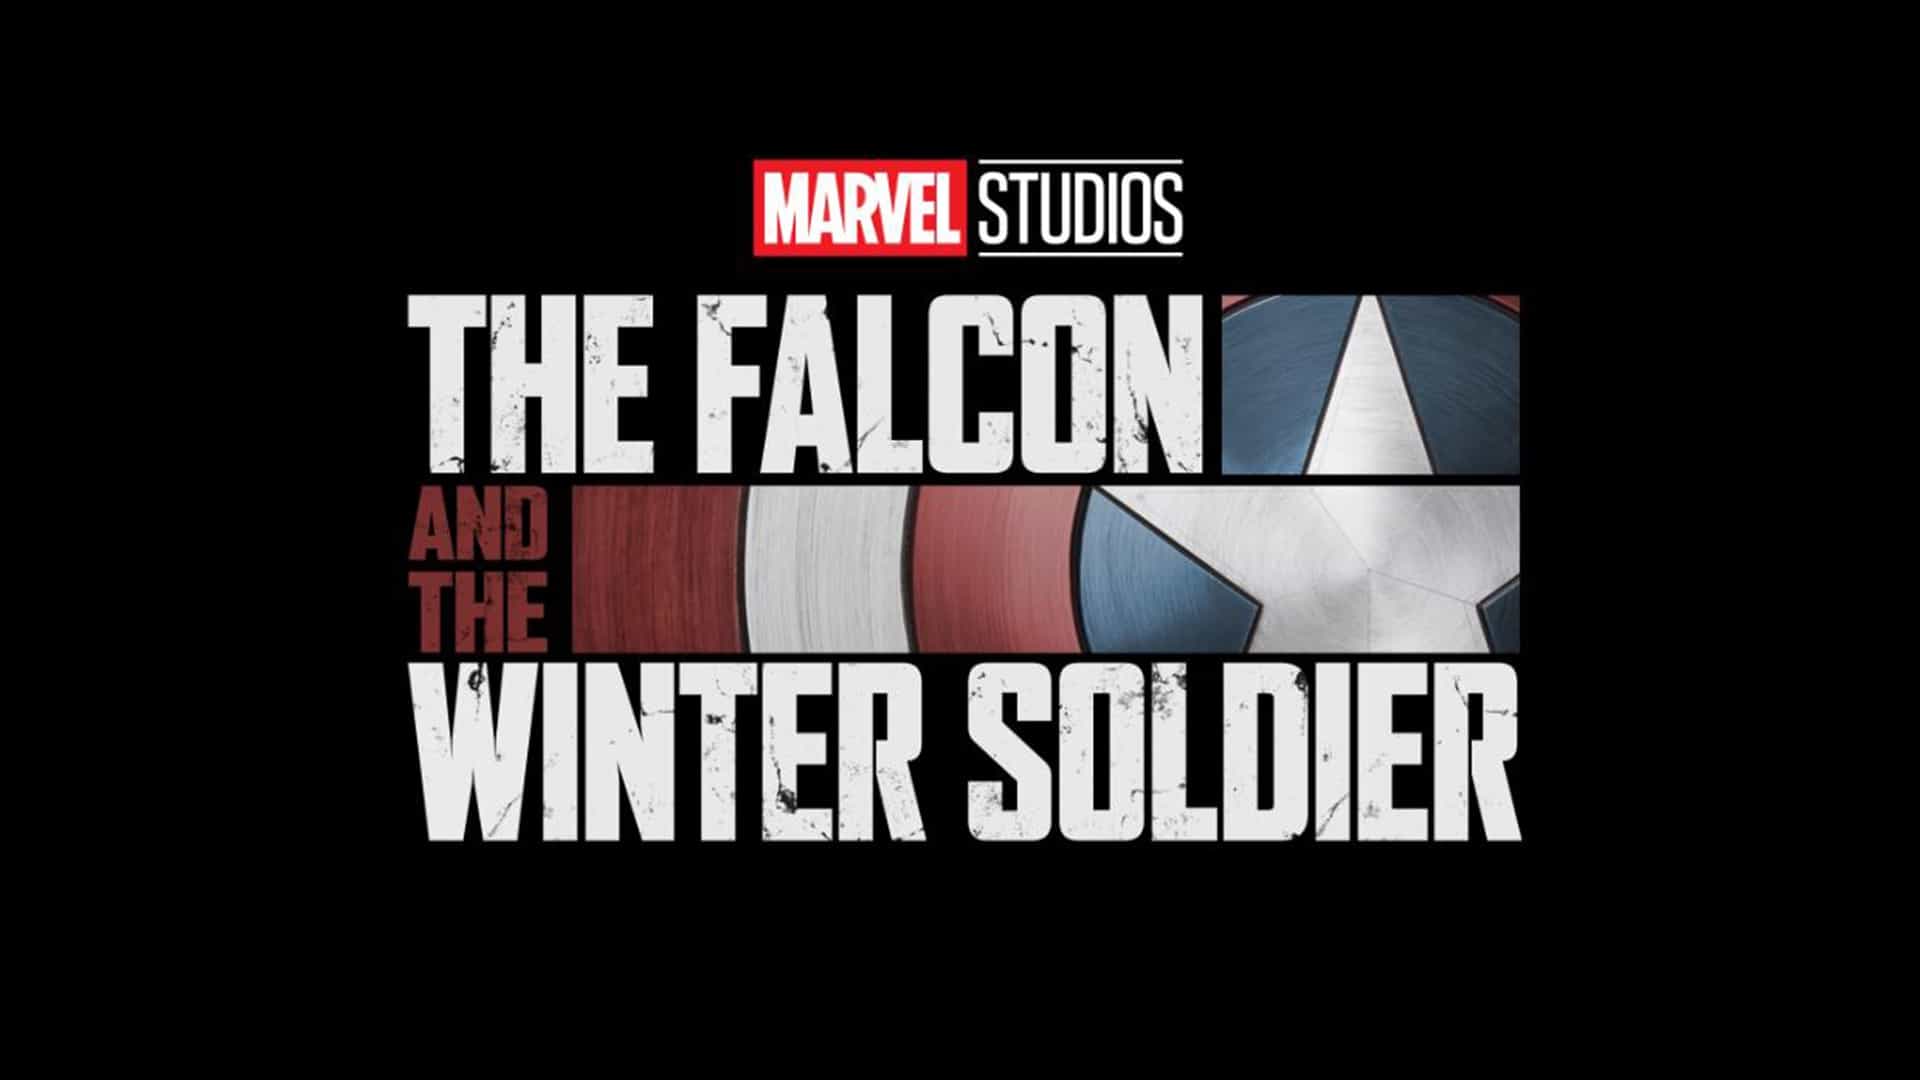 The falcon and the winter soldier gadget